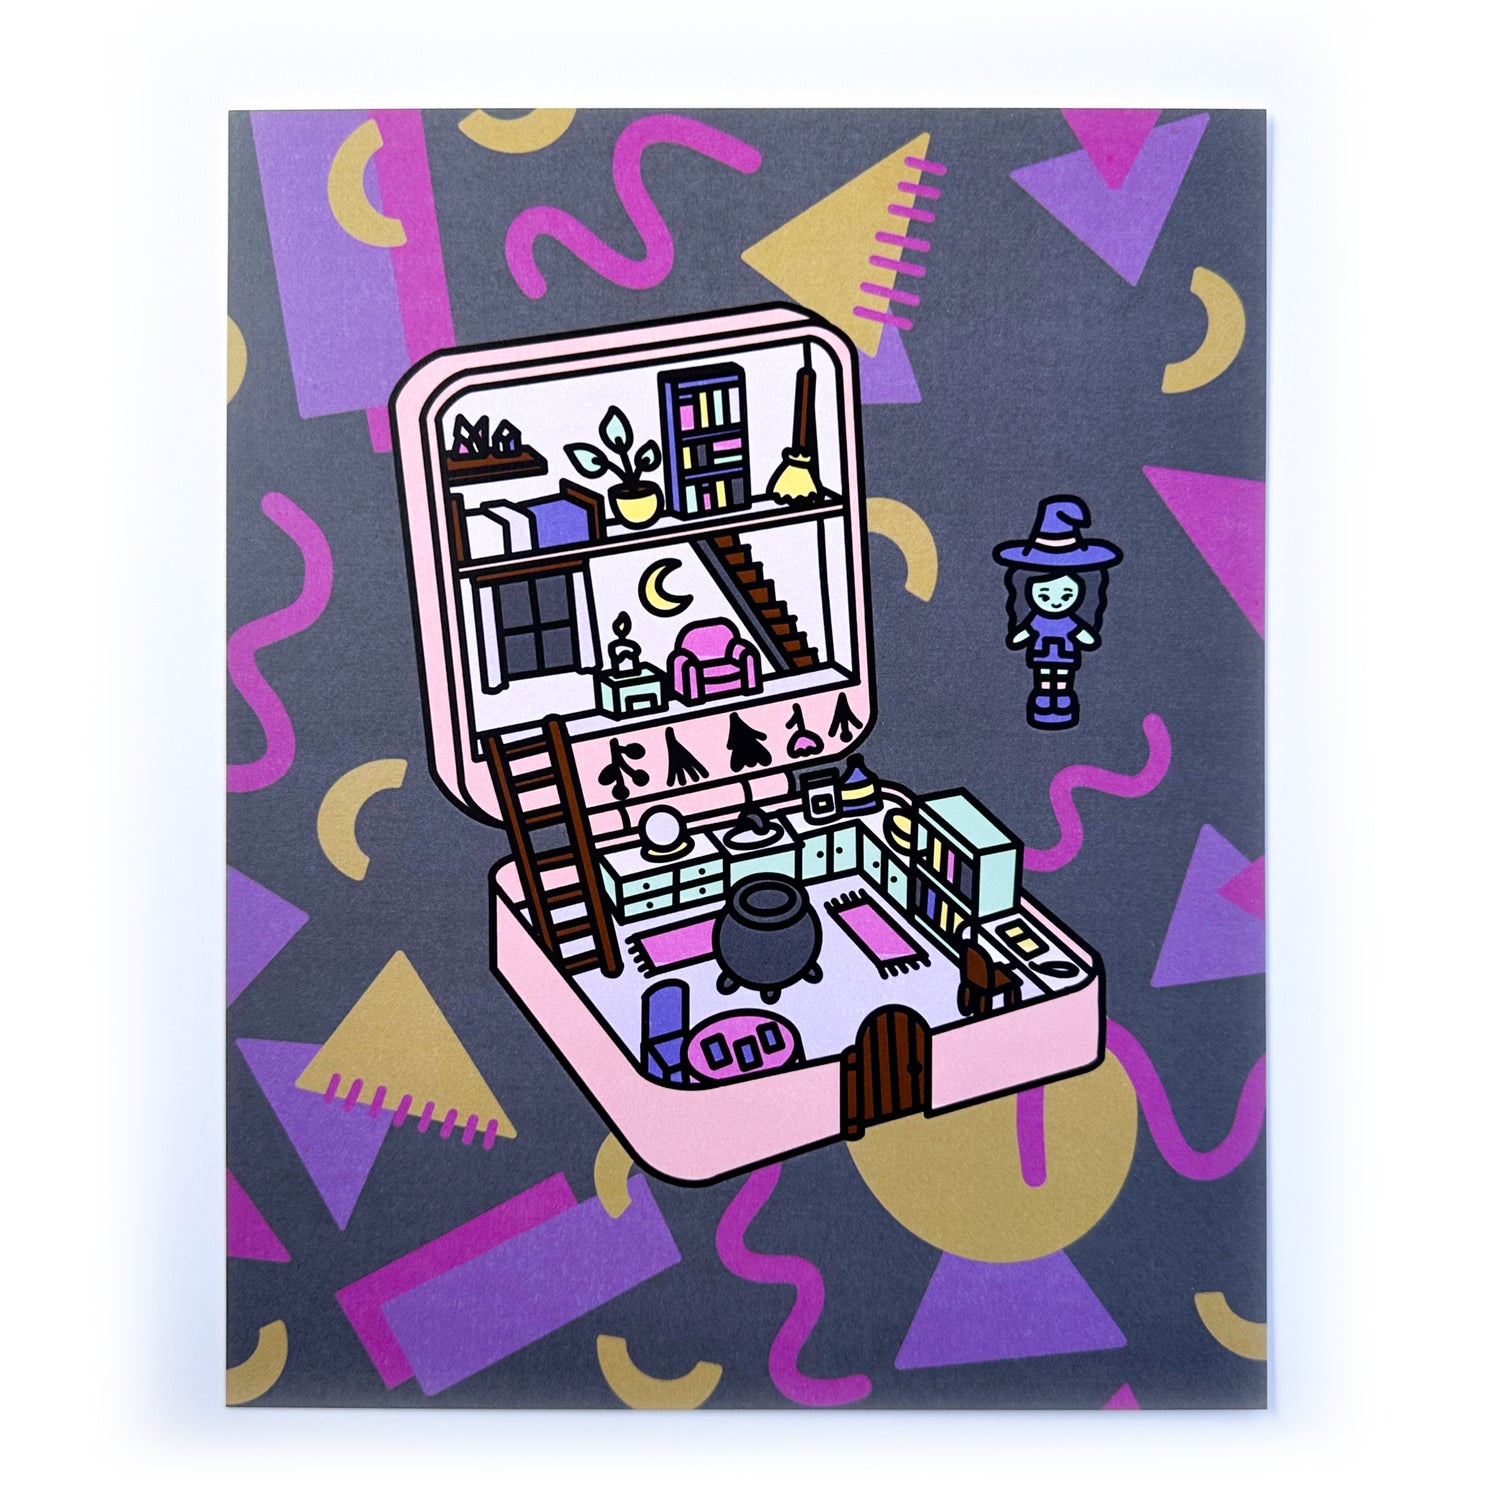 A print of an illustration of a Polly Pocket style toy of a little witch doll and her little witch house. There is a background of squiggles and shapes reminiscent of 90's arcade floor in fun purple and pink colors in the background. 